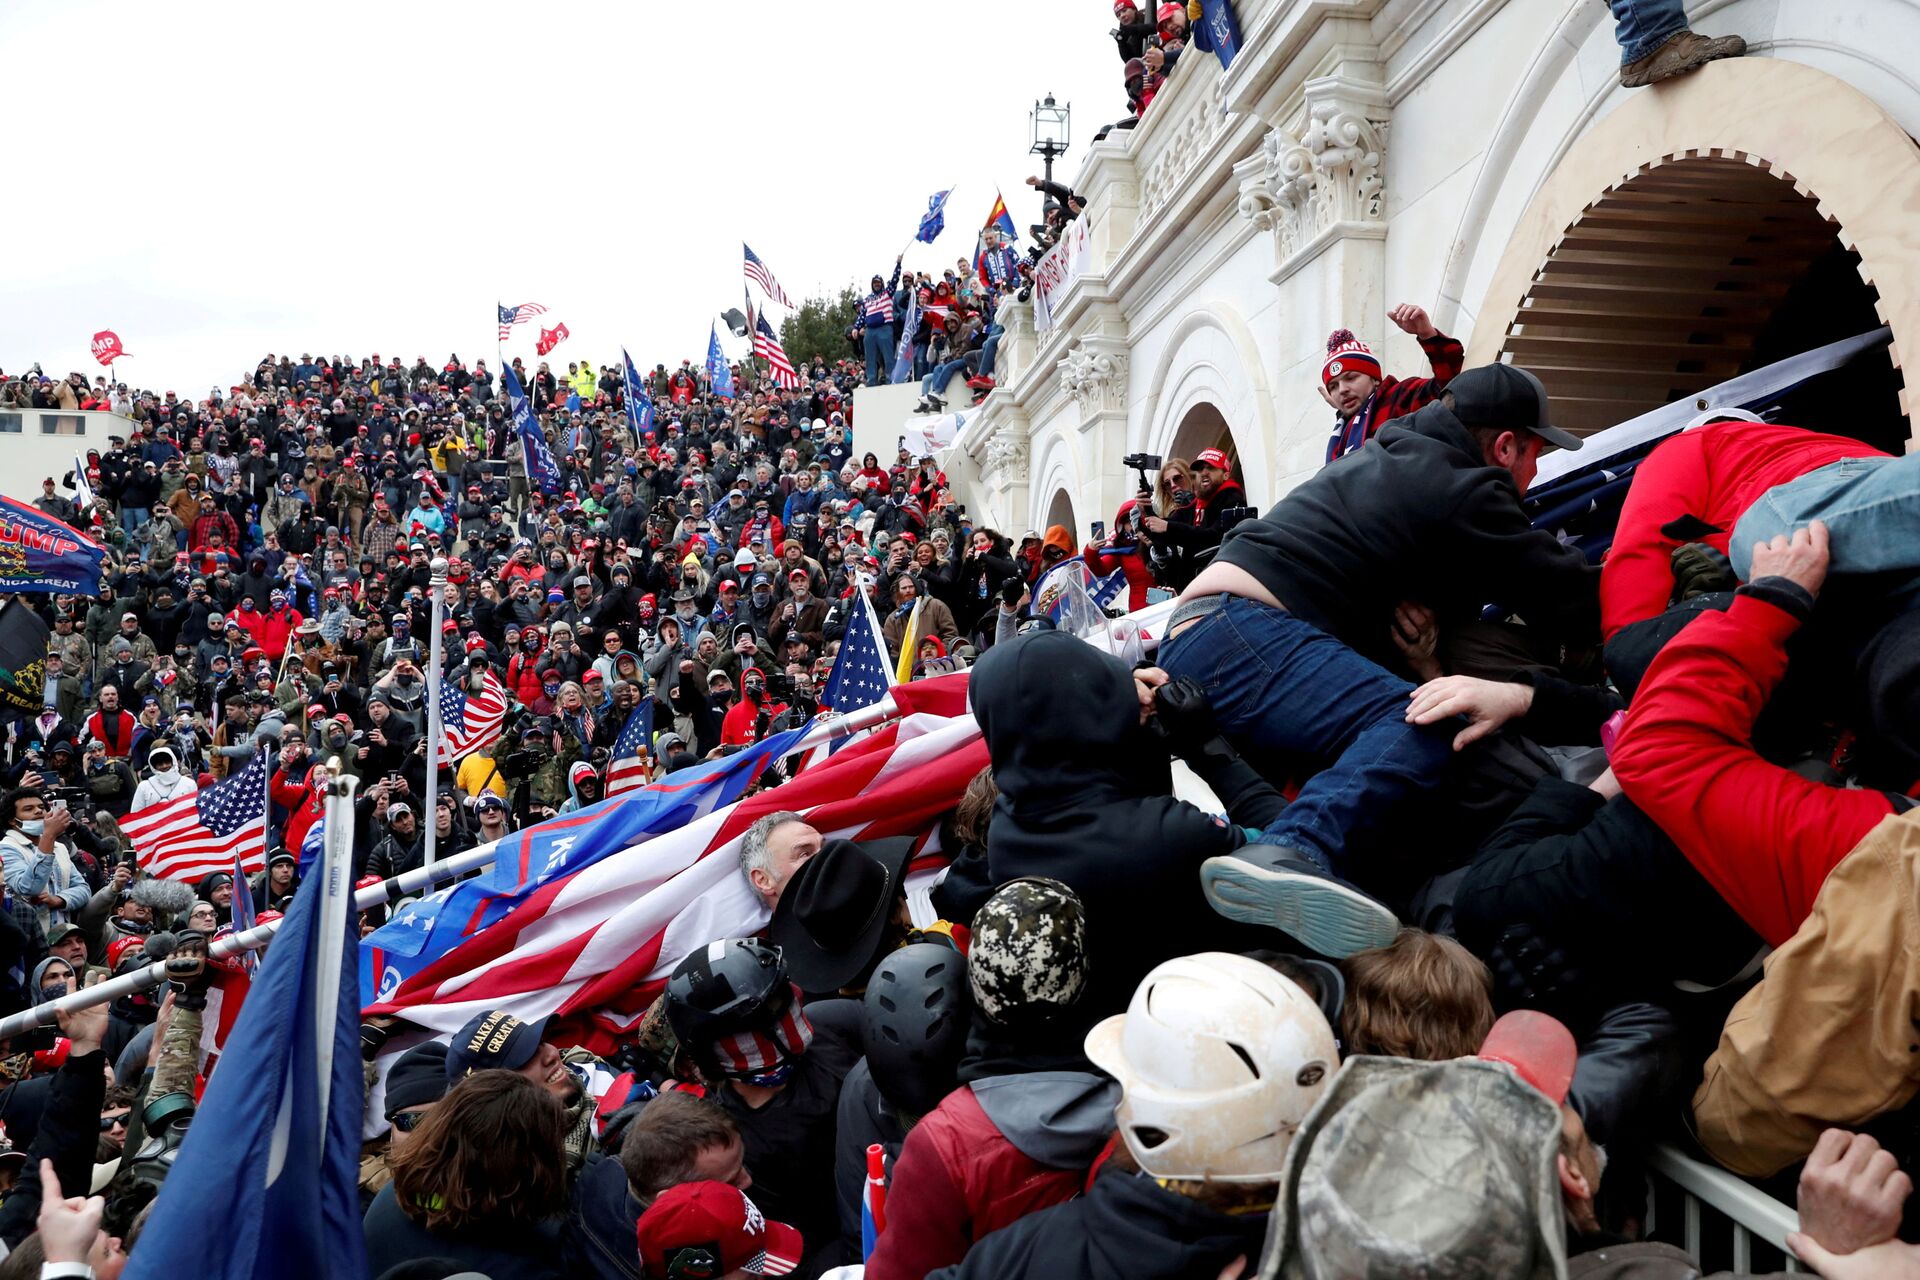  Pro-Trump protesters storm into the U.S. Capitol during clashes with police, during a rally to contest the certification of the 2020 U.S. presidential election results by the U.S. Congress, in Washington, U.S, January 6, 2021 - Sputnik International, 1920, 07.09.2021